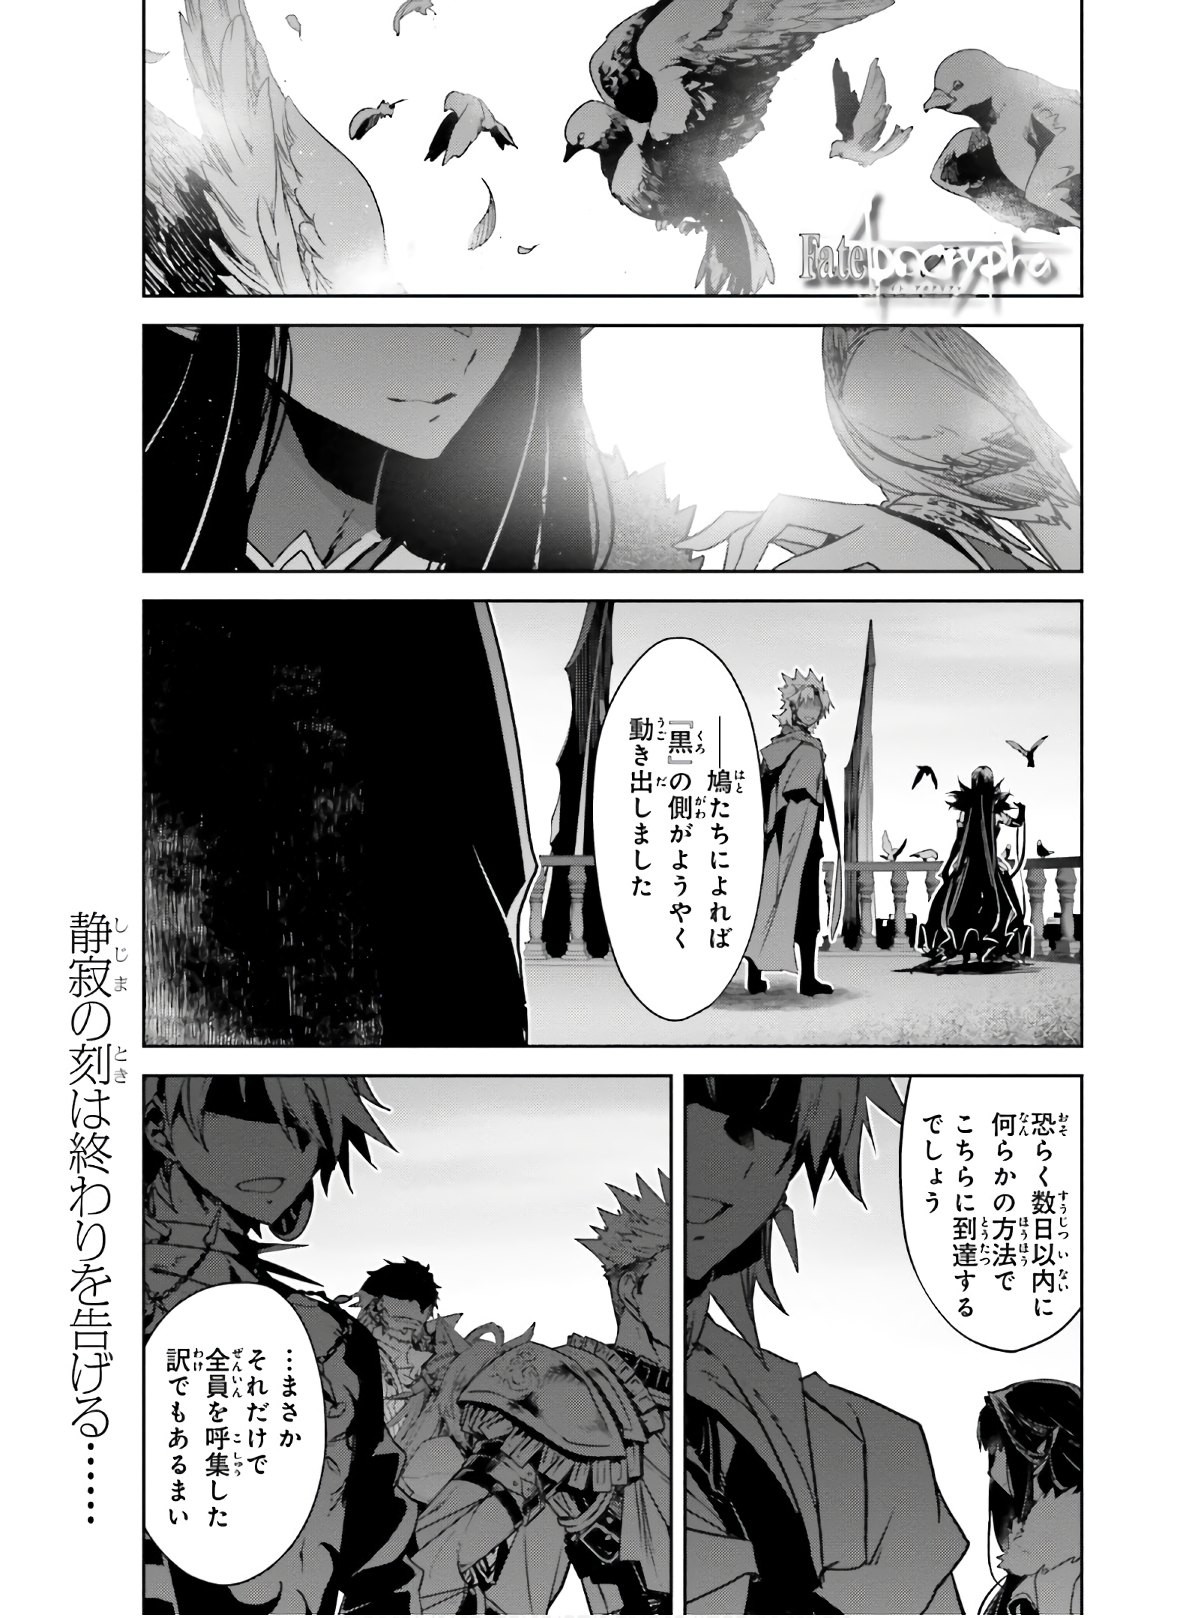 Fate-Apocrypha - Chapter 52 - Page 1